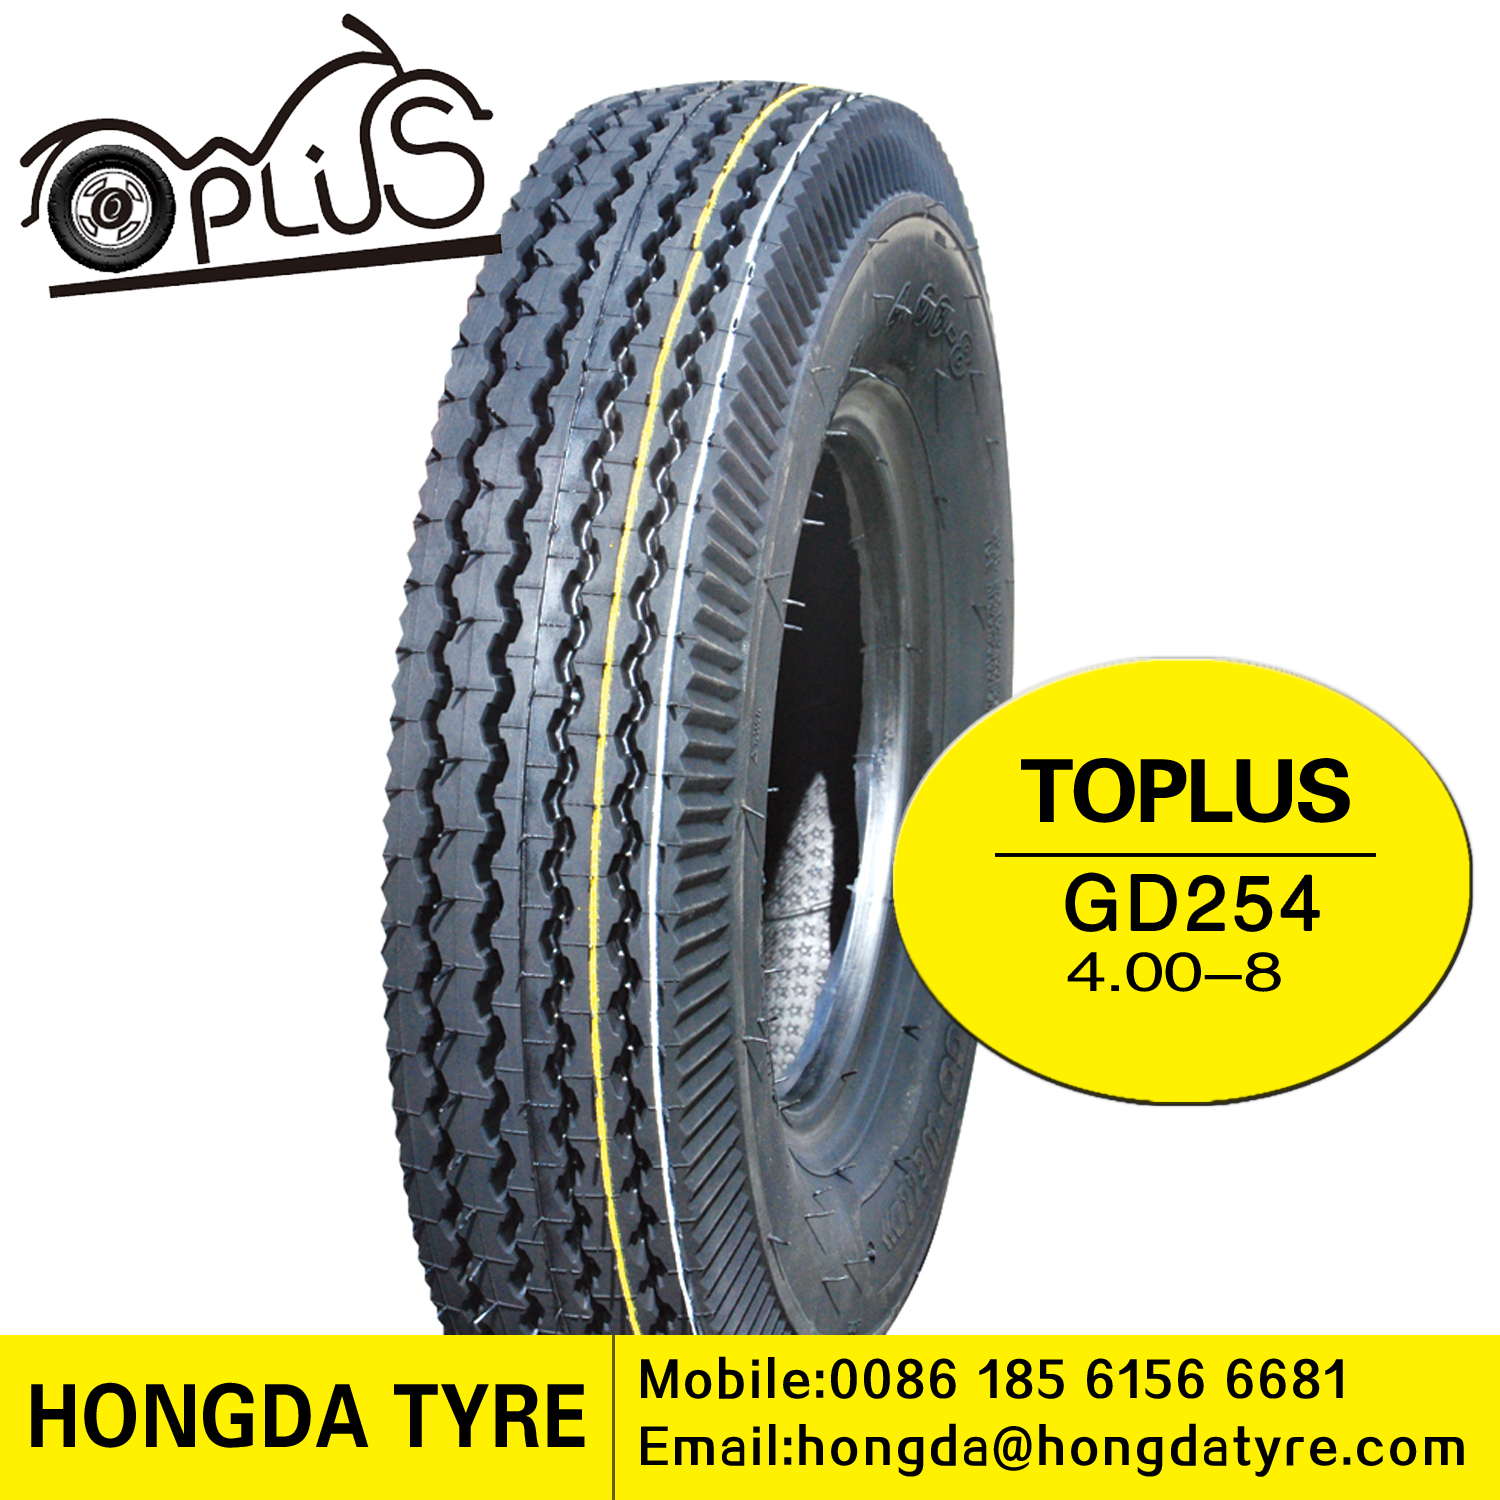 Motorcycle tyre GD254